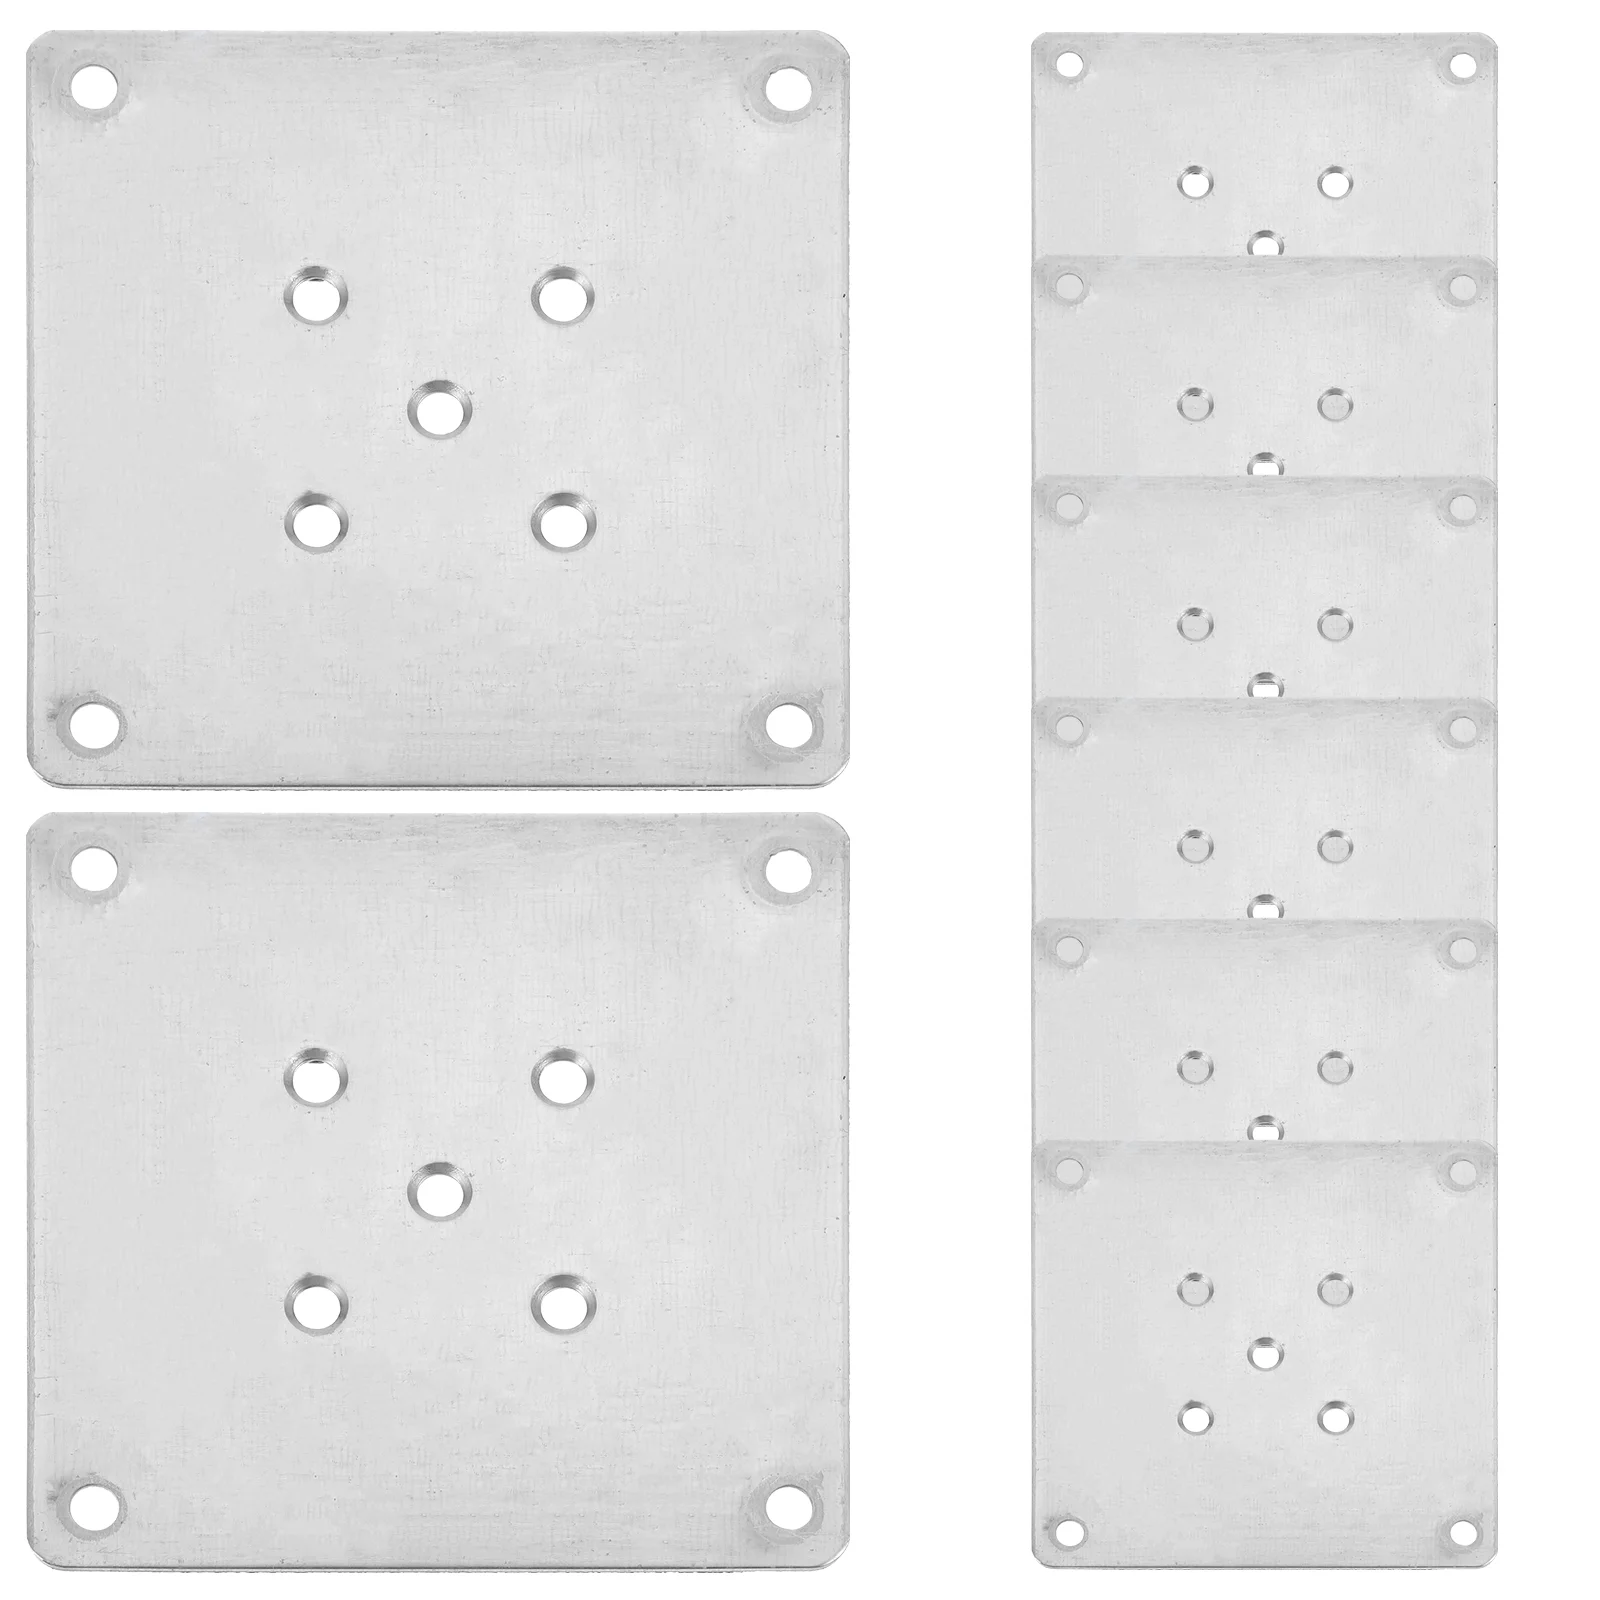 

8 Pcs Furniture Sofa Legs Thickened Metal Table Connection Fixing Piece Mounting Plates for Seat Attachment Couch